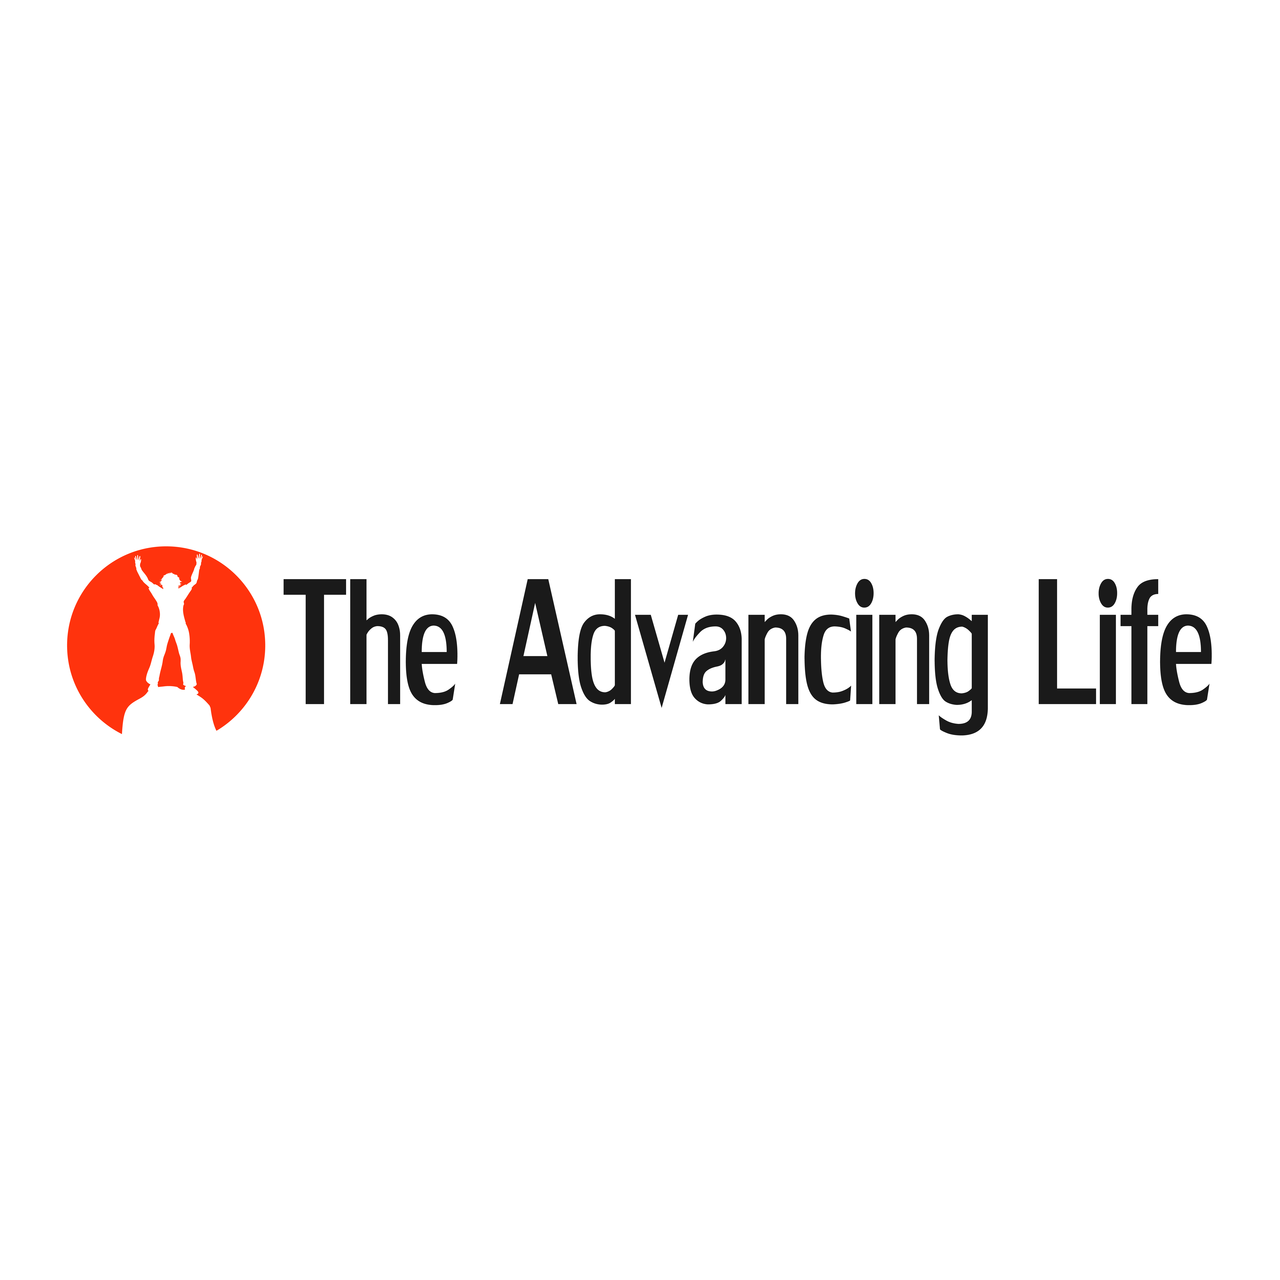 The Advancing Life